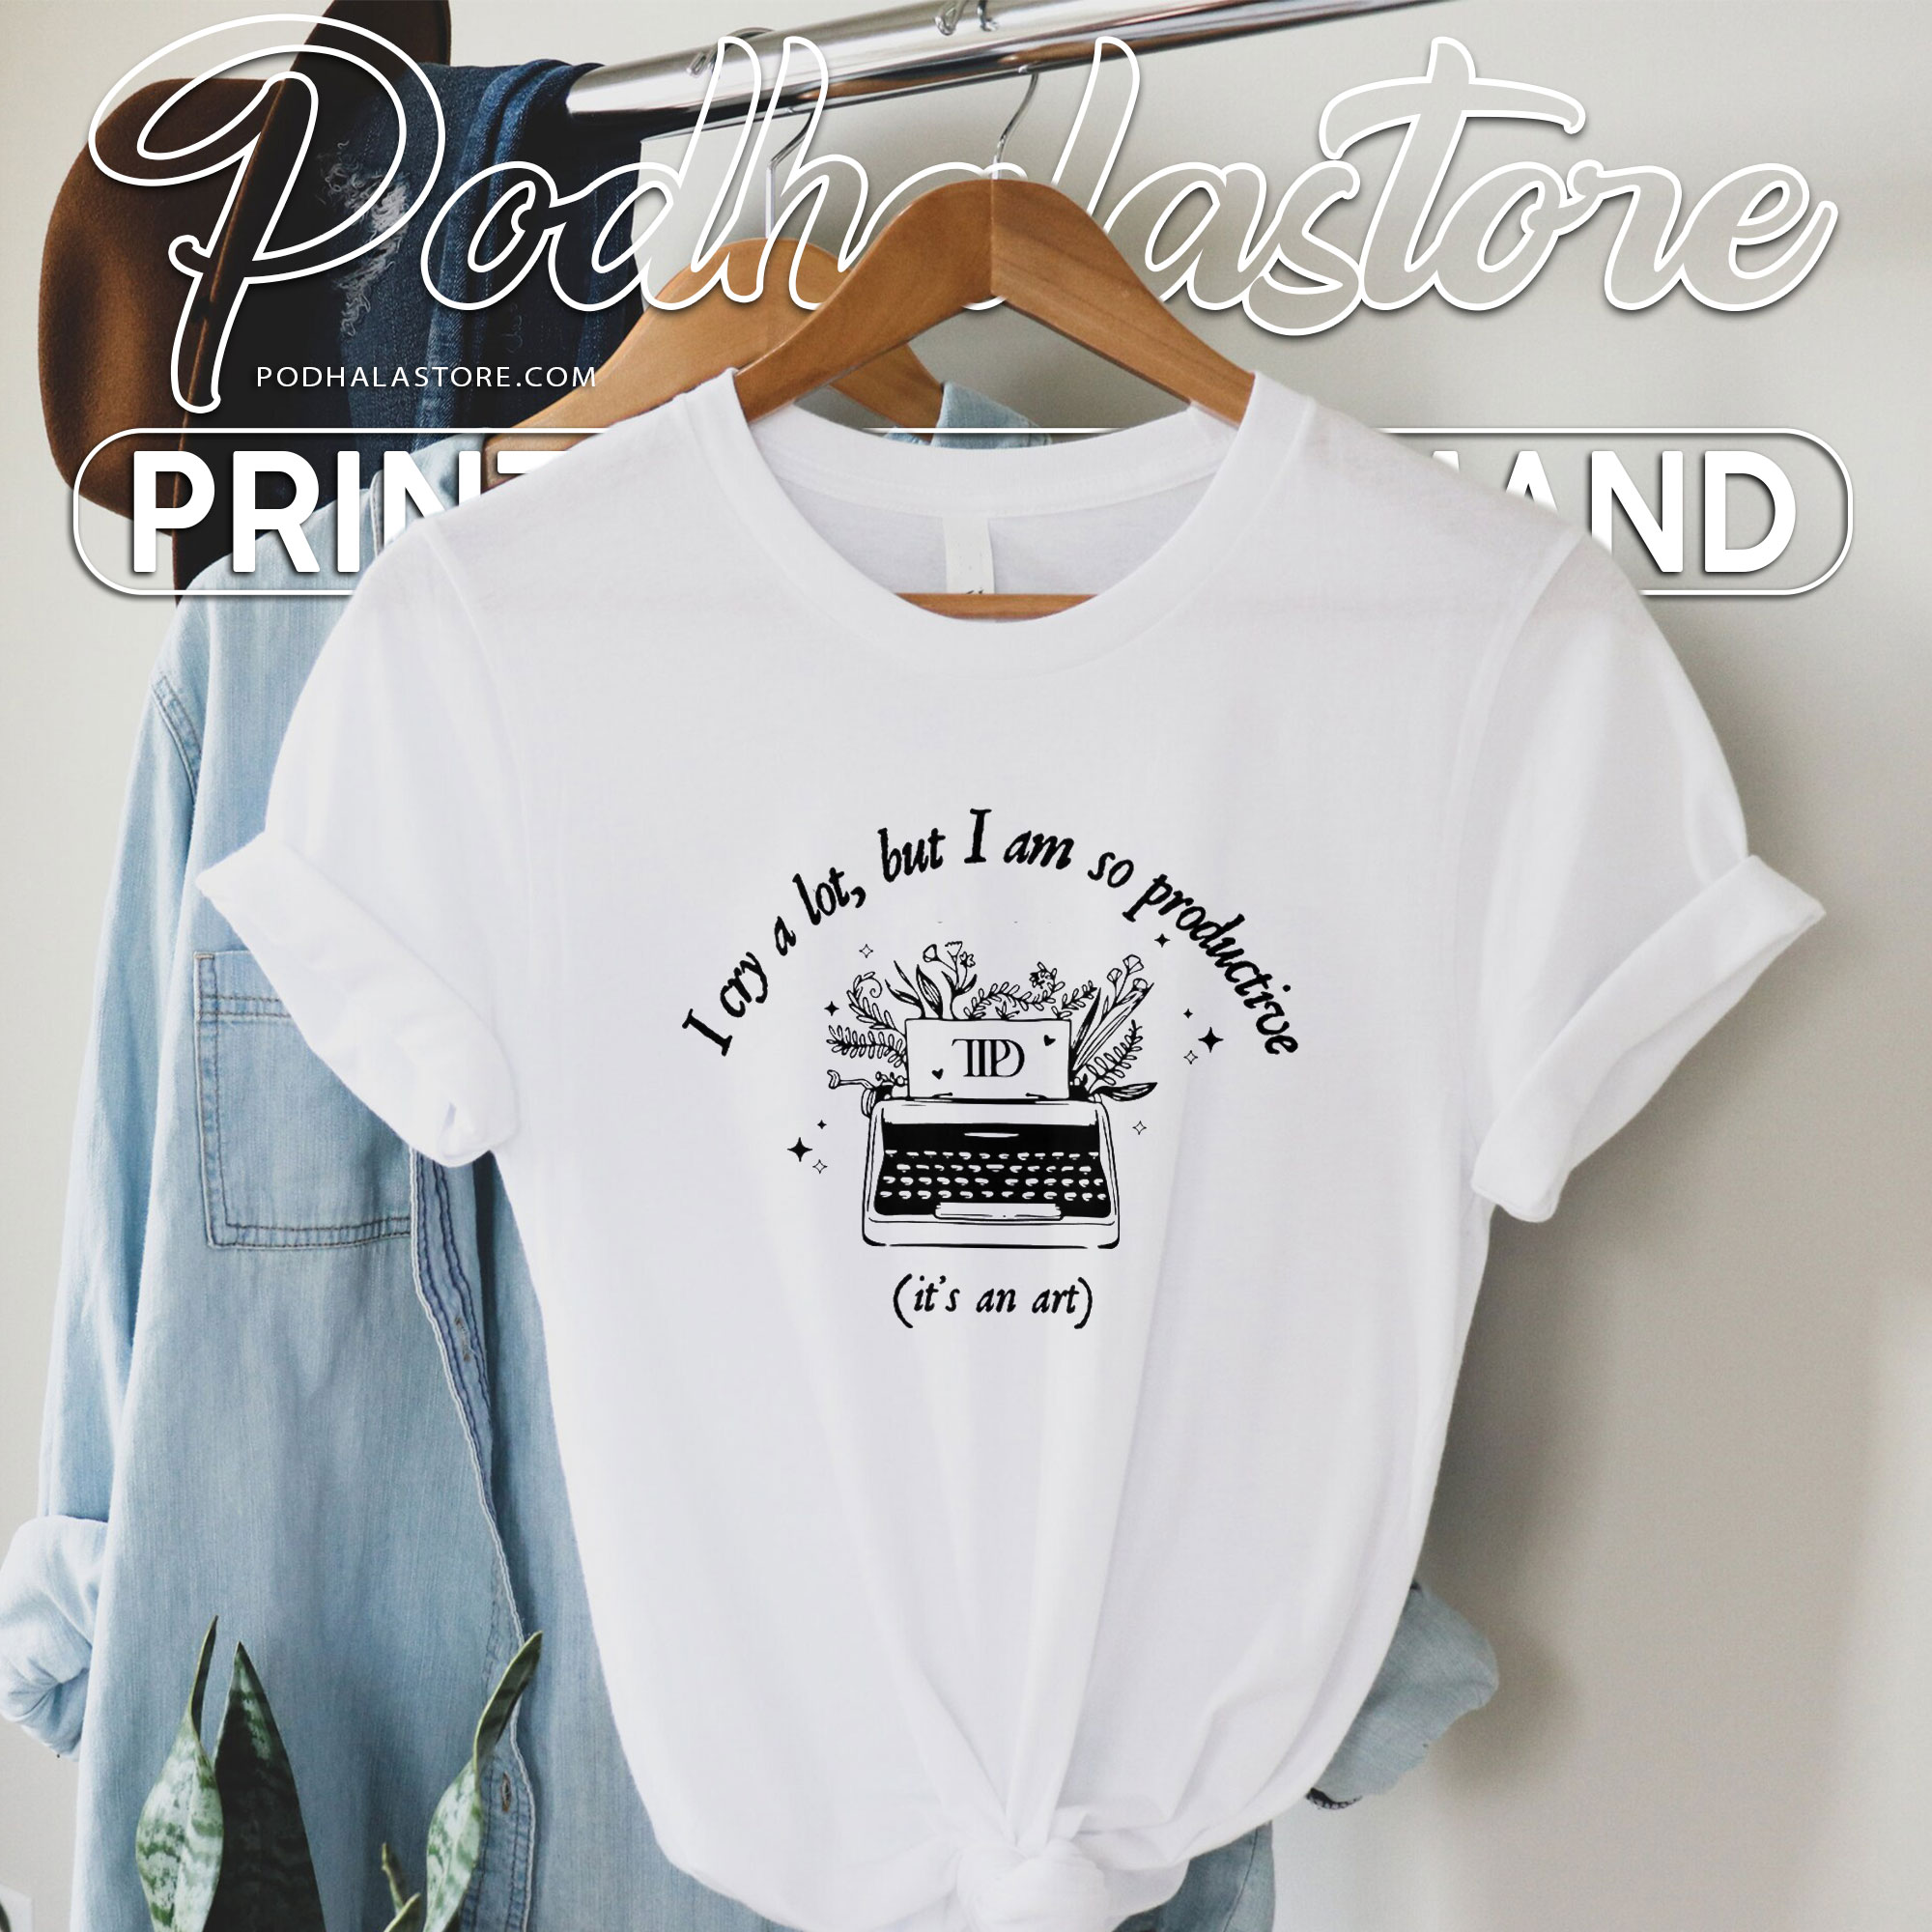 I Cry A Lot But I Am So Productive Shirt, The Tortured Poets Department, Taylor Swift Lyrics